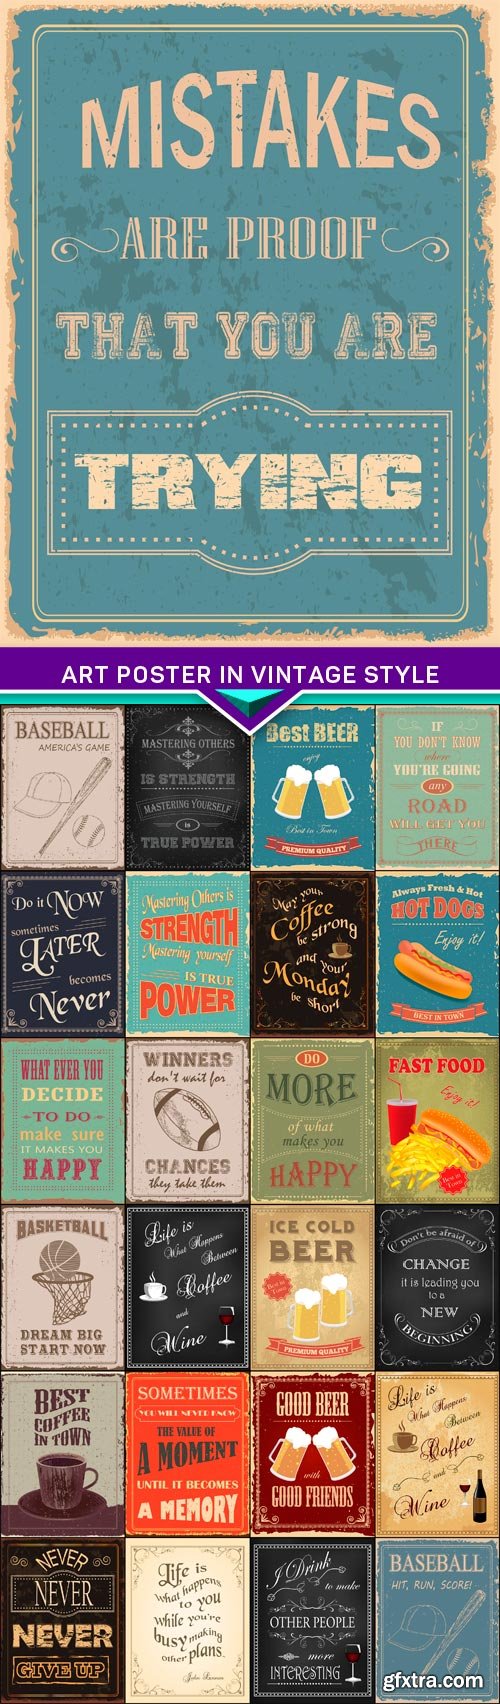 Art poster in vintage style 25x EPS